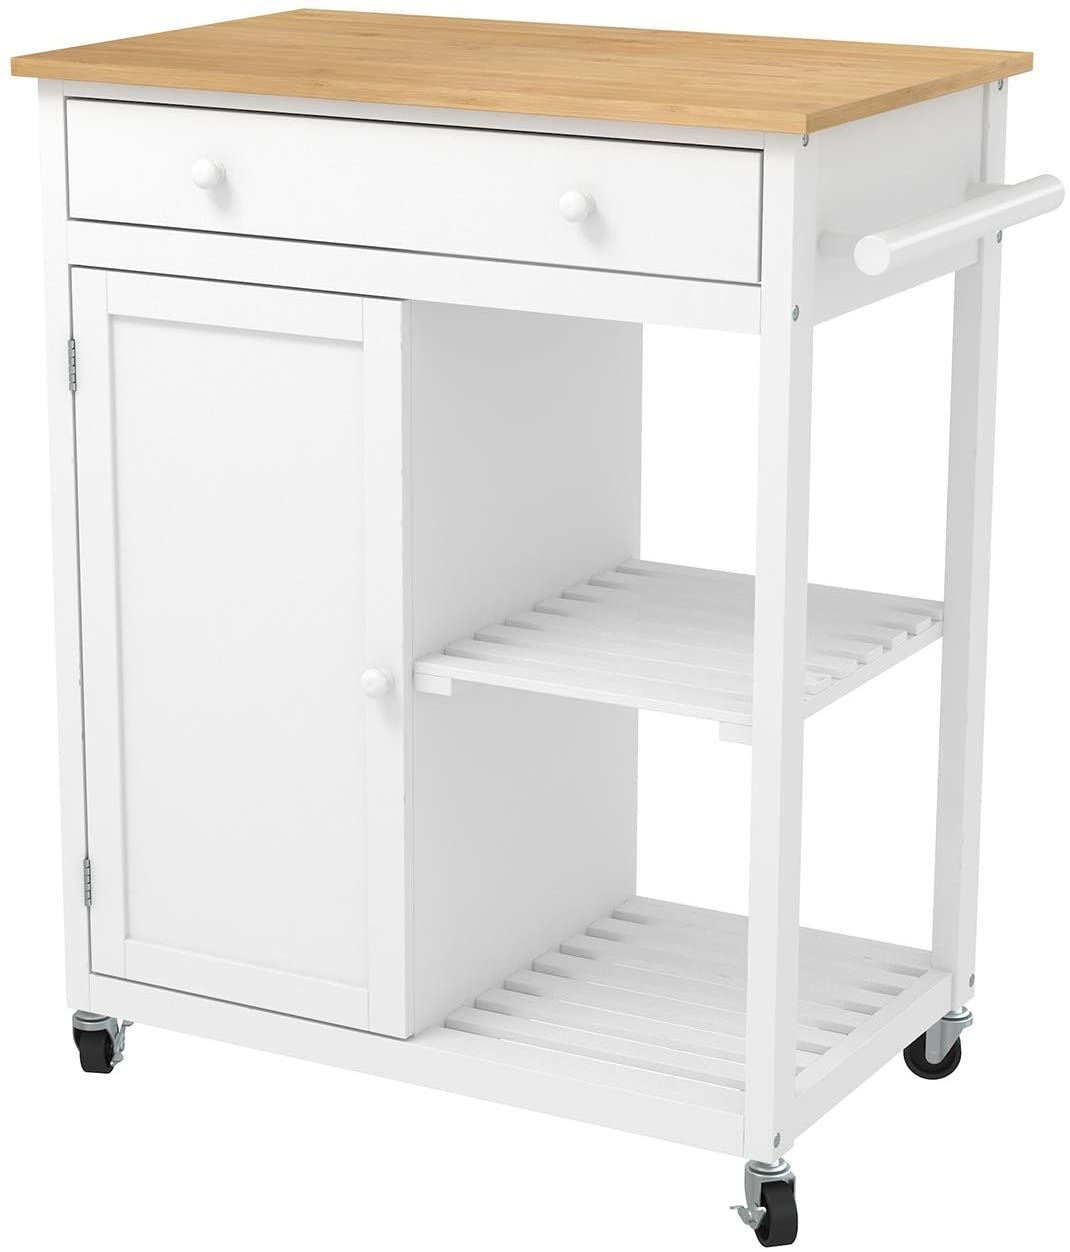 Mecor Kitchen Island Cart w/Wood Top, Rolling Utility Trolley on Wheels with Storage Drawer, Shelves and Cabinet (White)